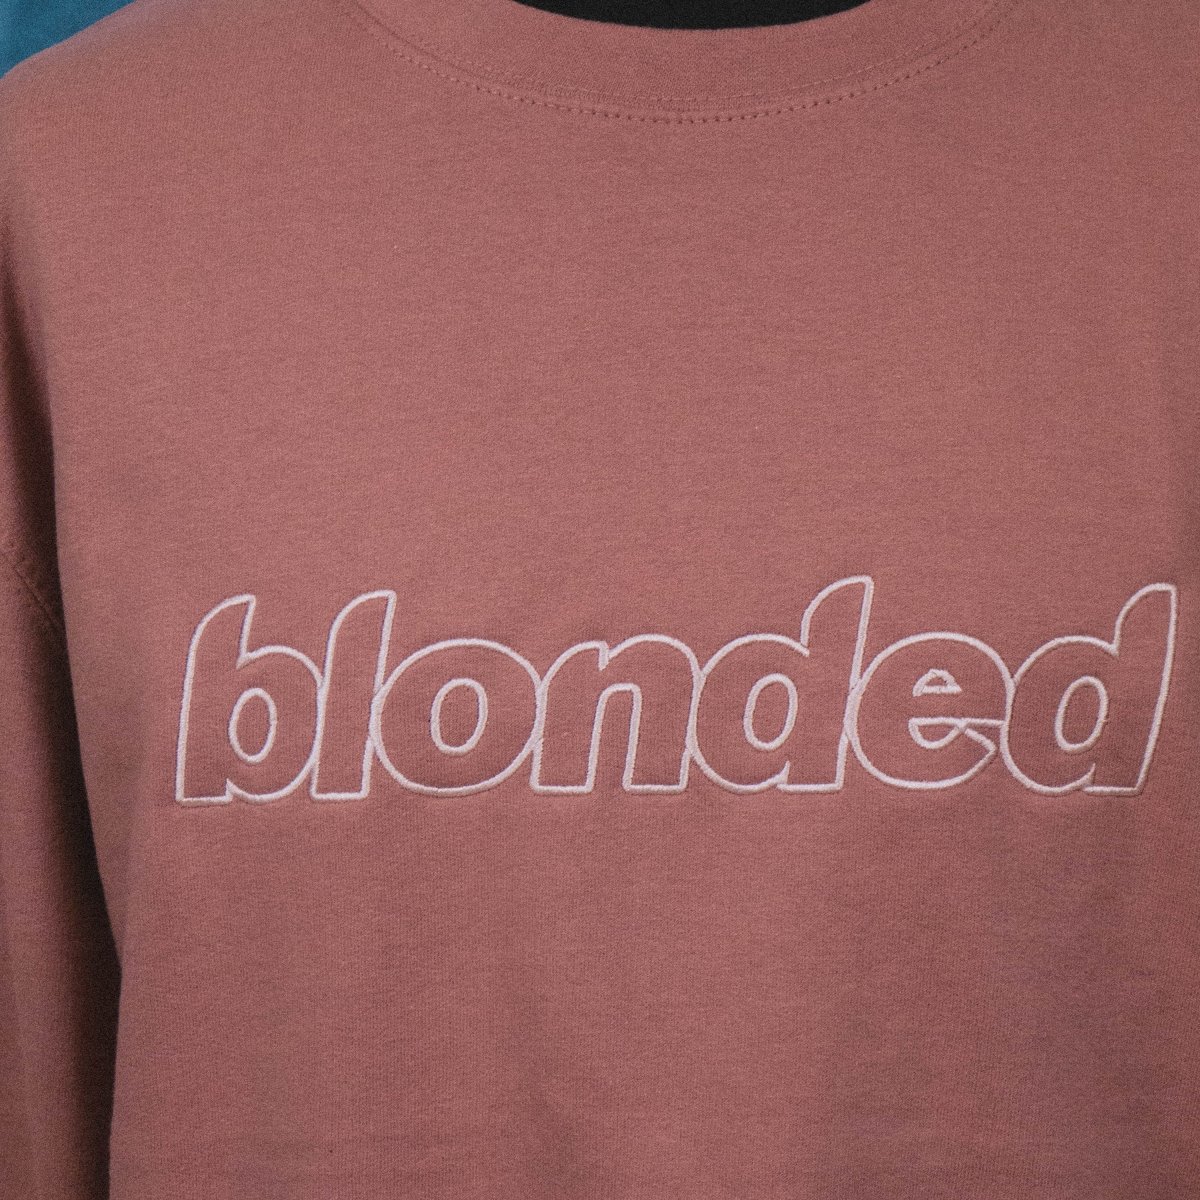 Frank Ocean - Blonded Unisex Embroidered Sweater